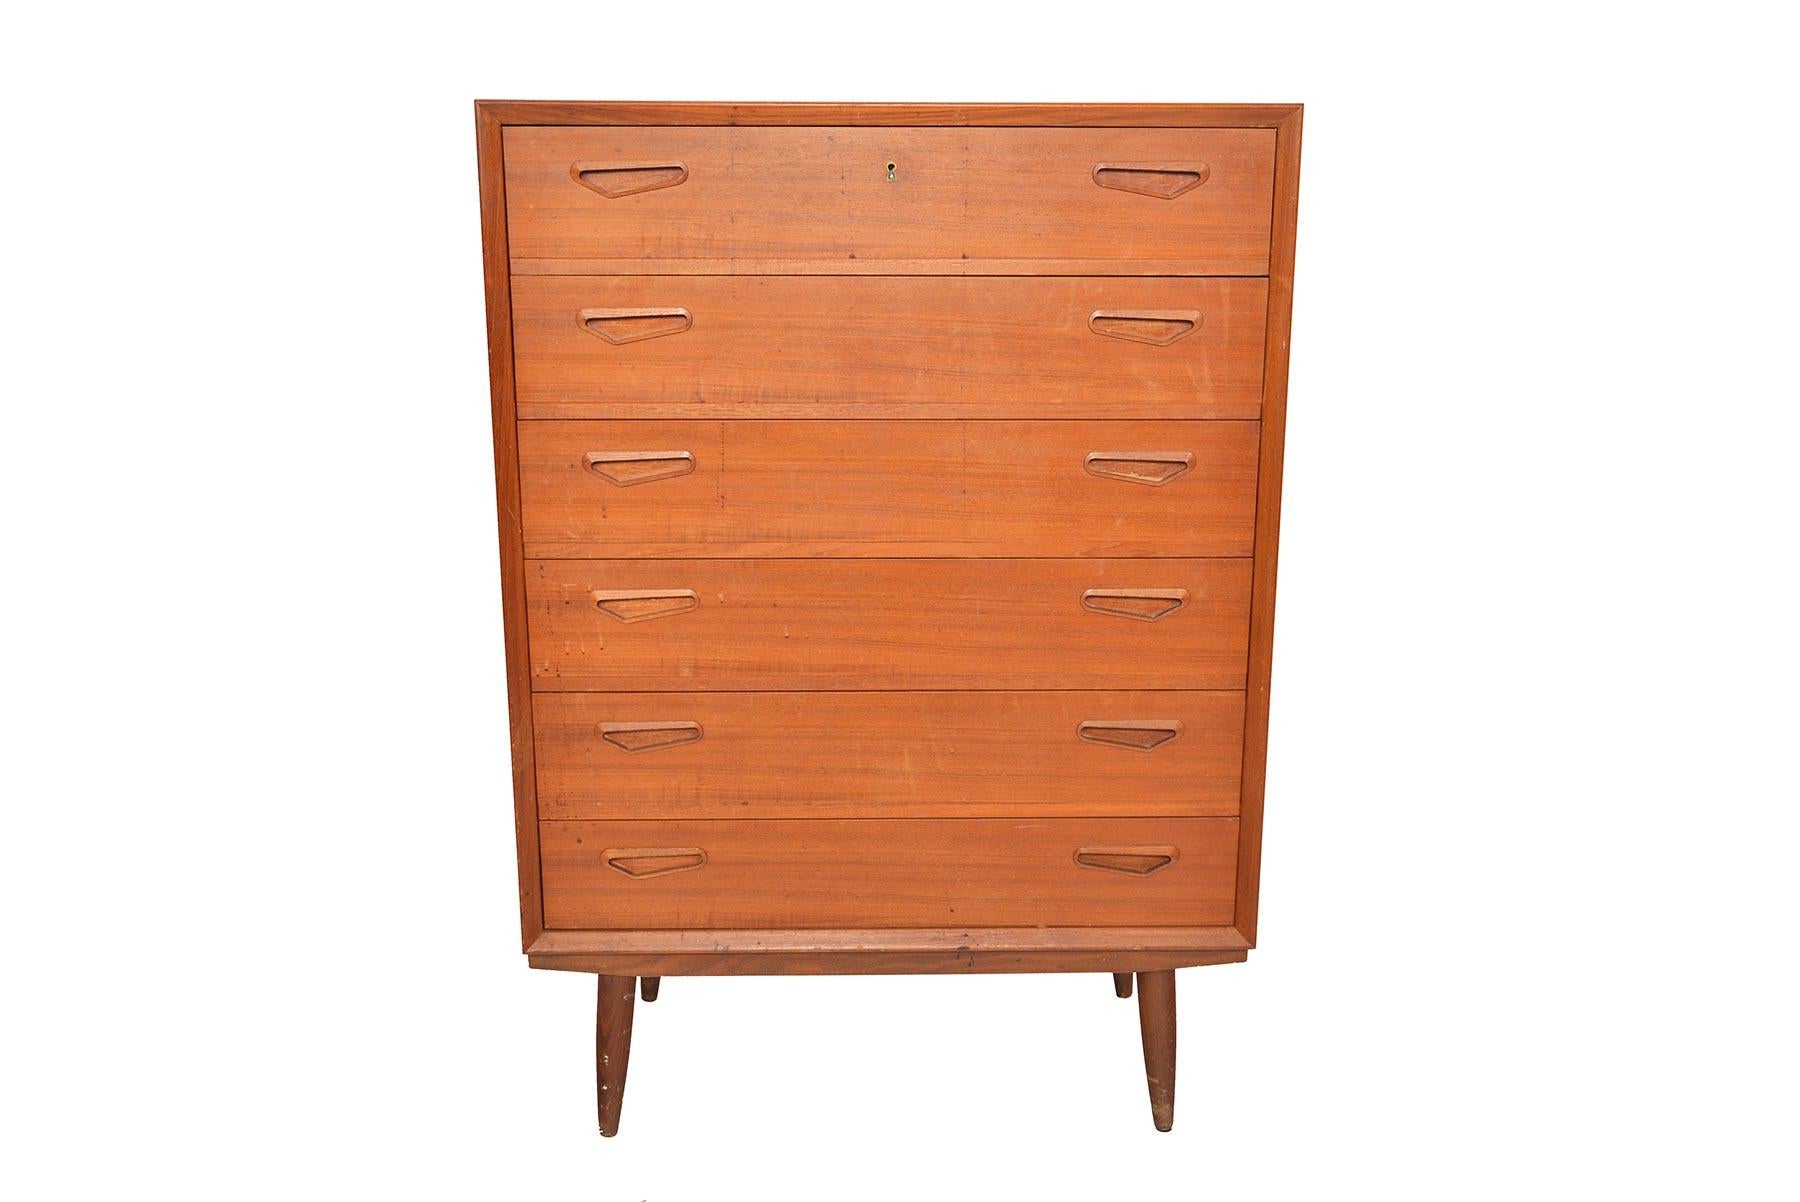 Origin: Denmark
Designer: Unknown
Manufacturer: Unknown
Era: 1960s
Dimensions: 33 wide x 17 deep x 46.5 tall
Drawer Interiors 30 wide x 14 deep x 4.5 tall

Condition: In good original condition with some cosmetic wear (will be addressed in